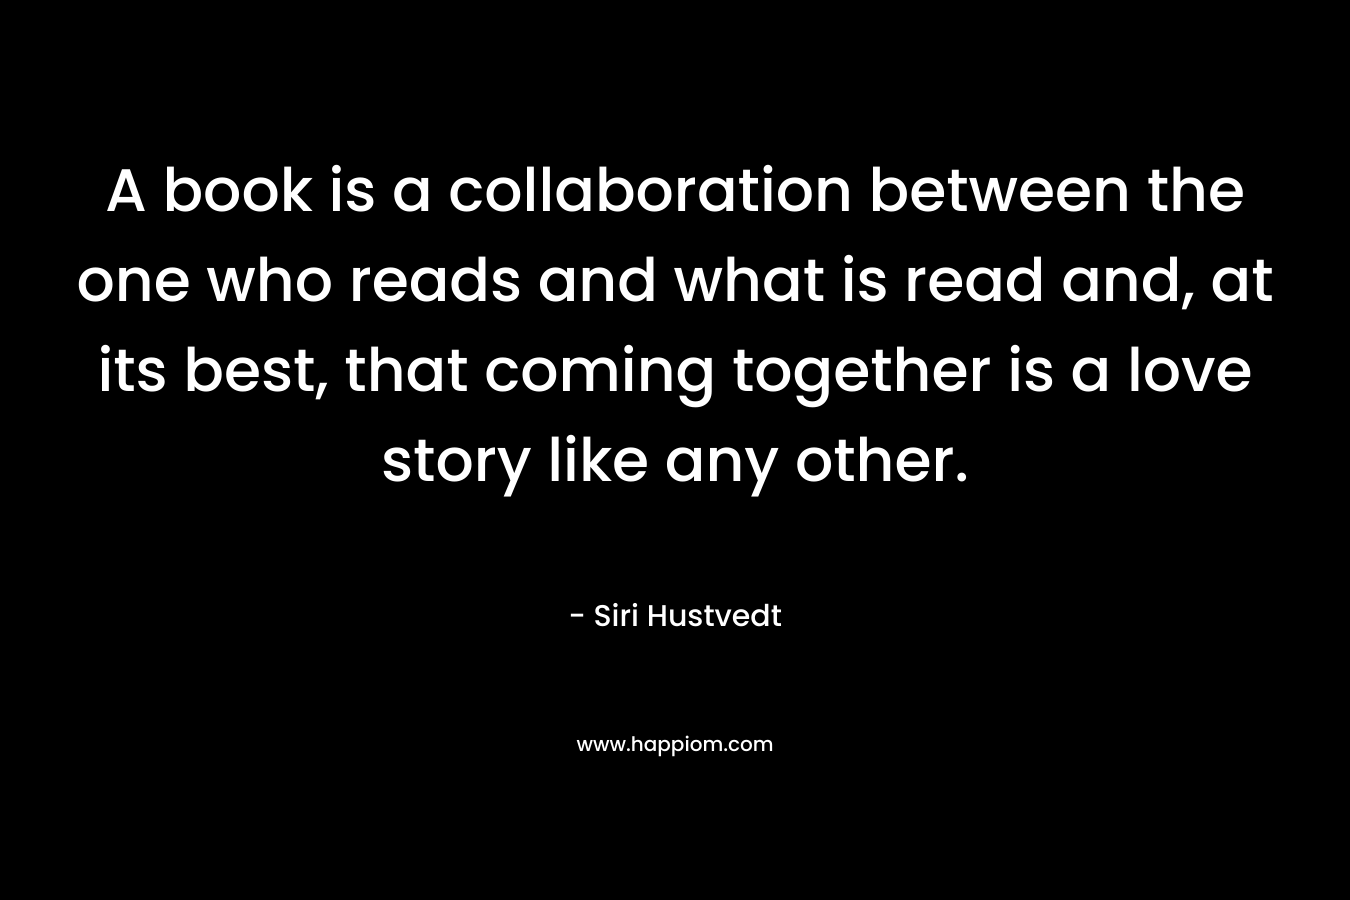 A book is a collaboration between the one who reads and what is read and, at its best, that coming together is a love story like any other.